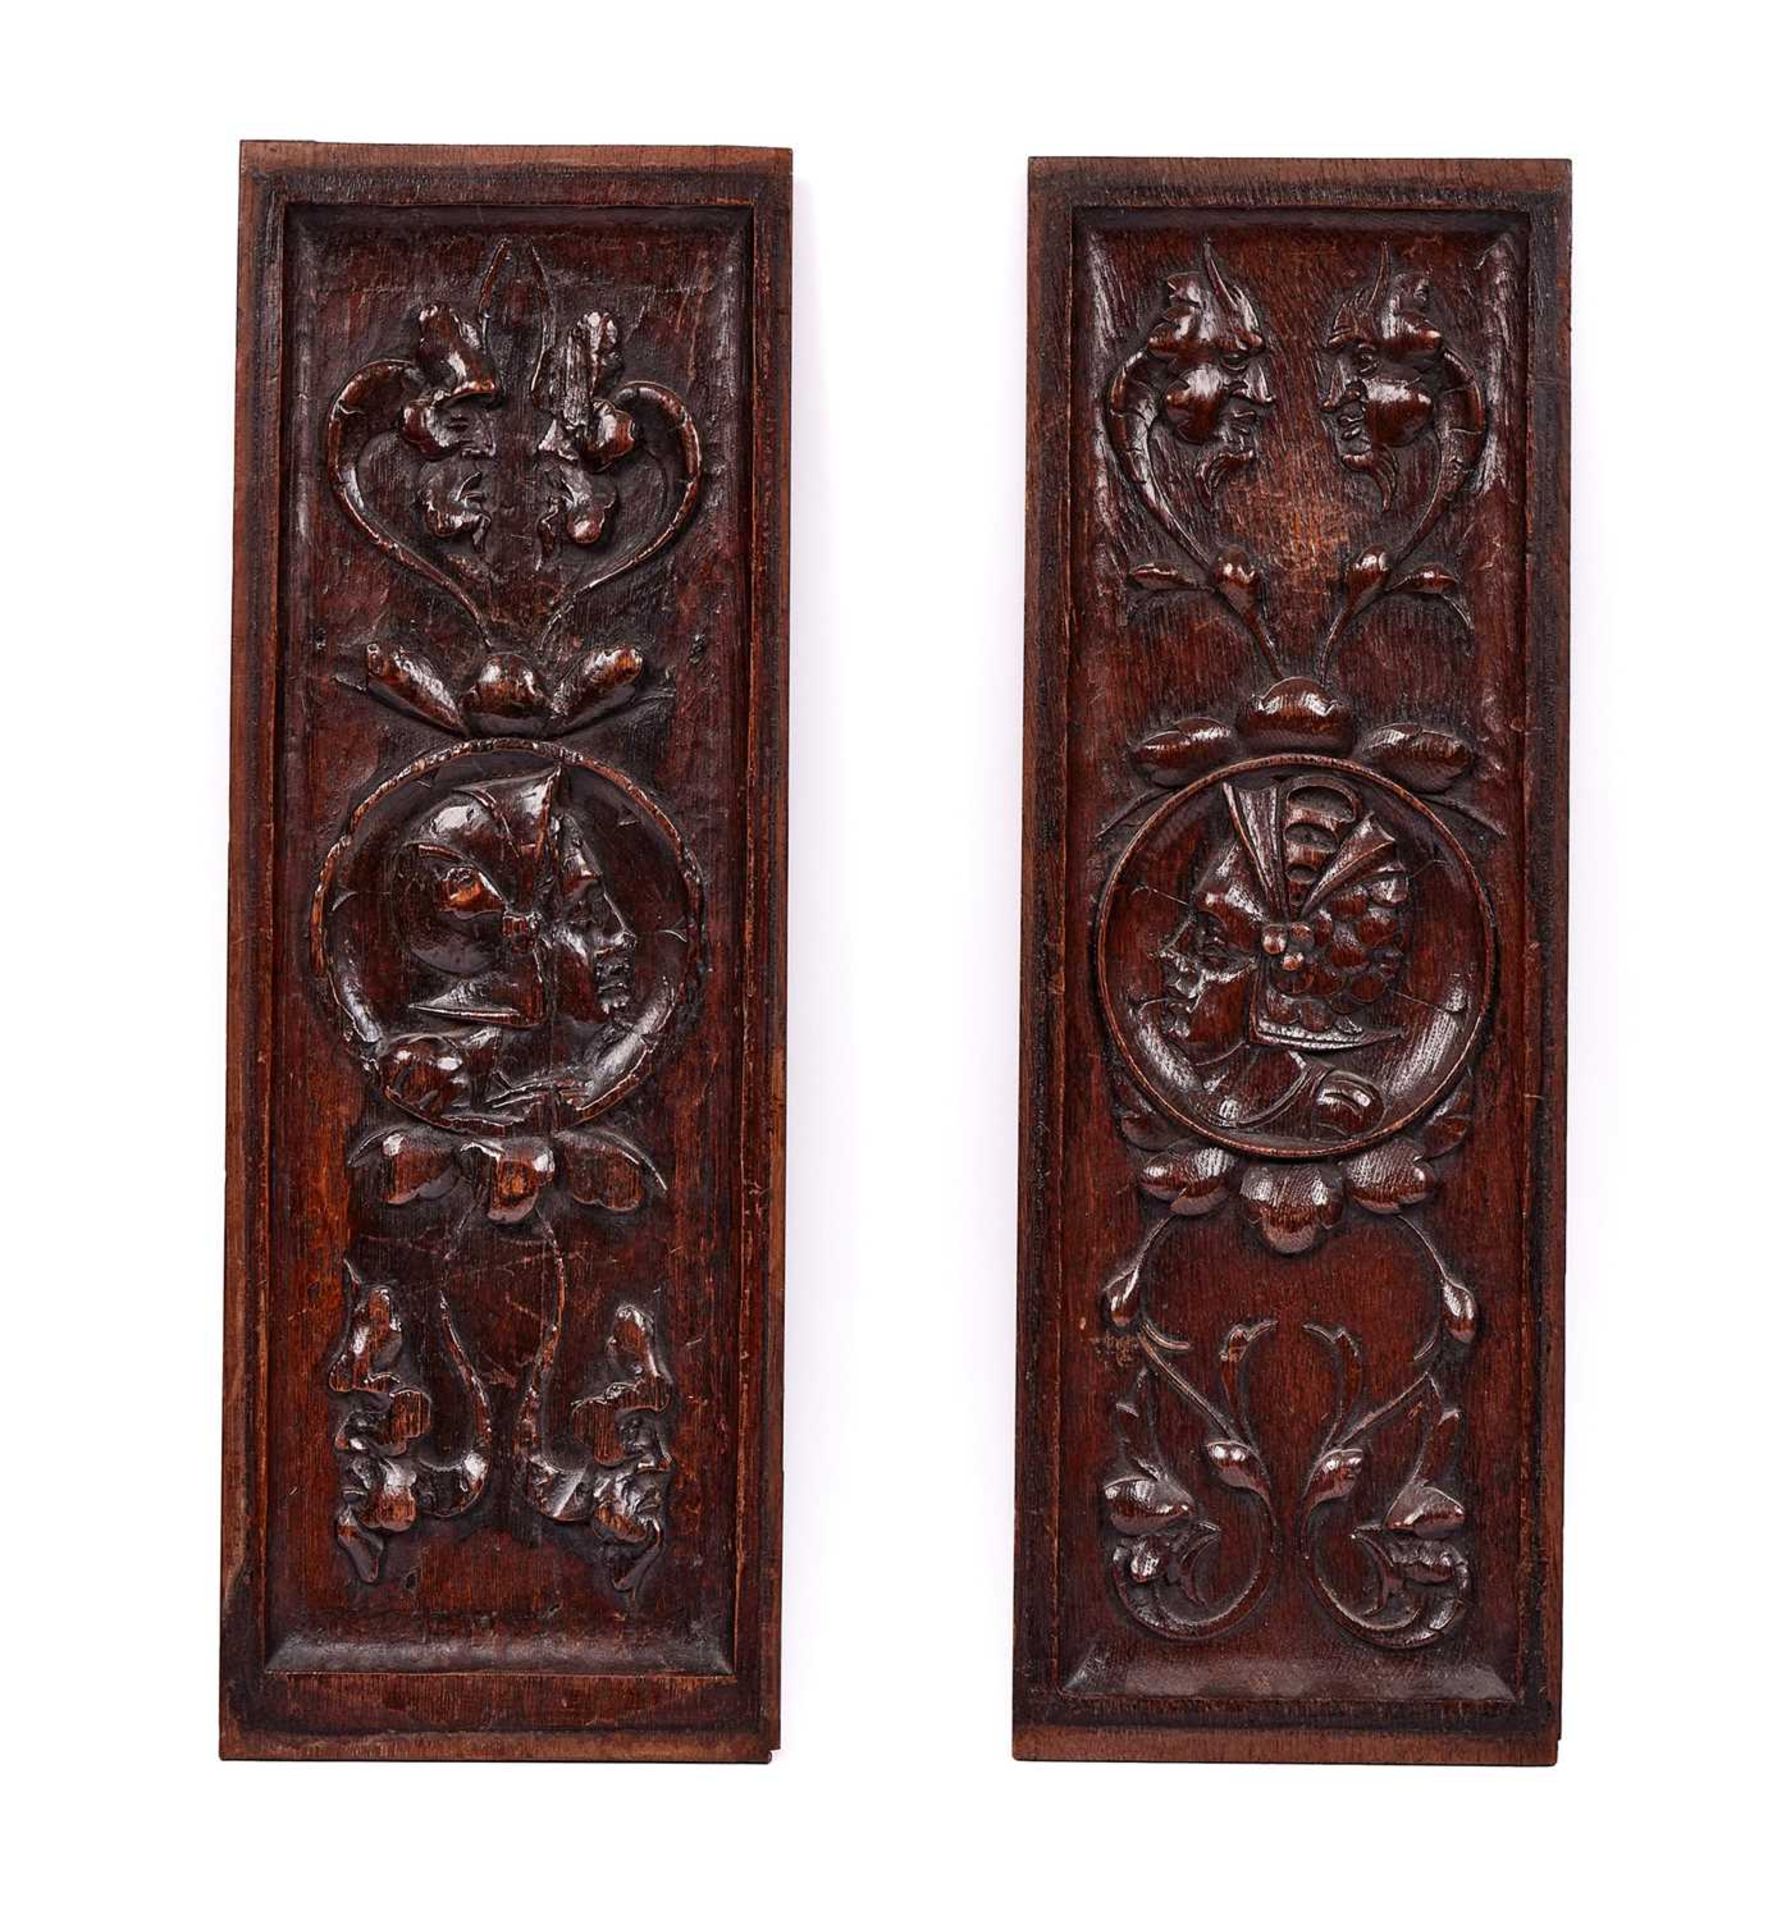 A PAIR OF 19TH CENTURY ROMAINE STYLE CARVED OAK PANELS